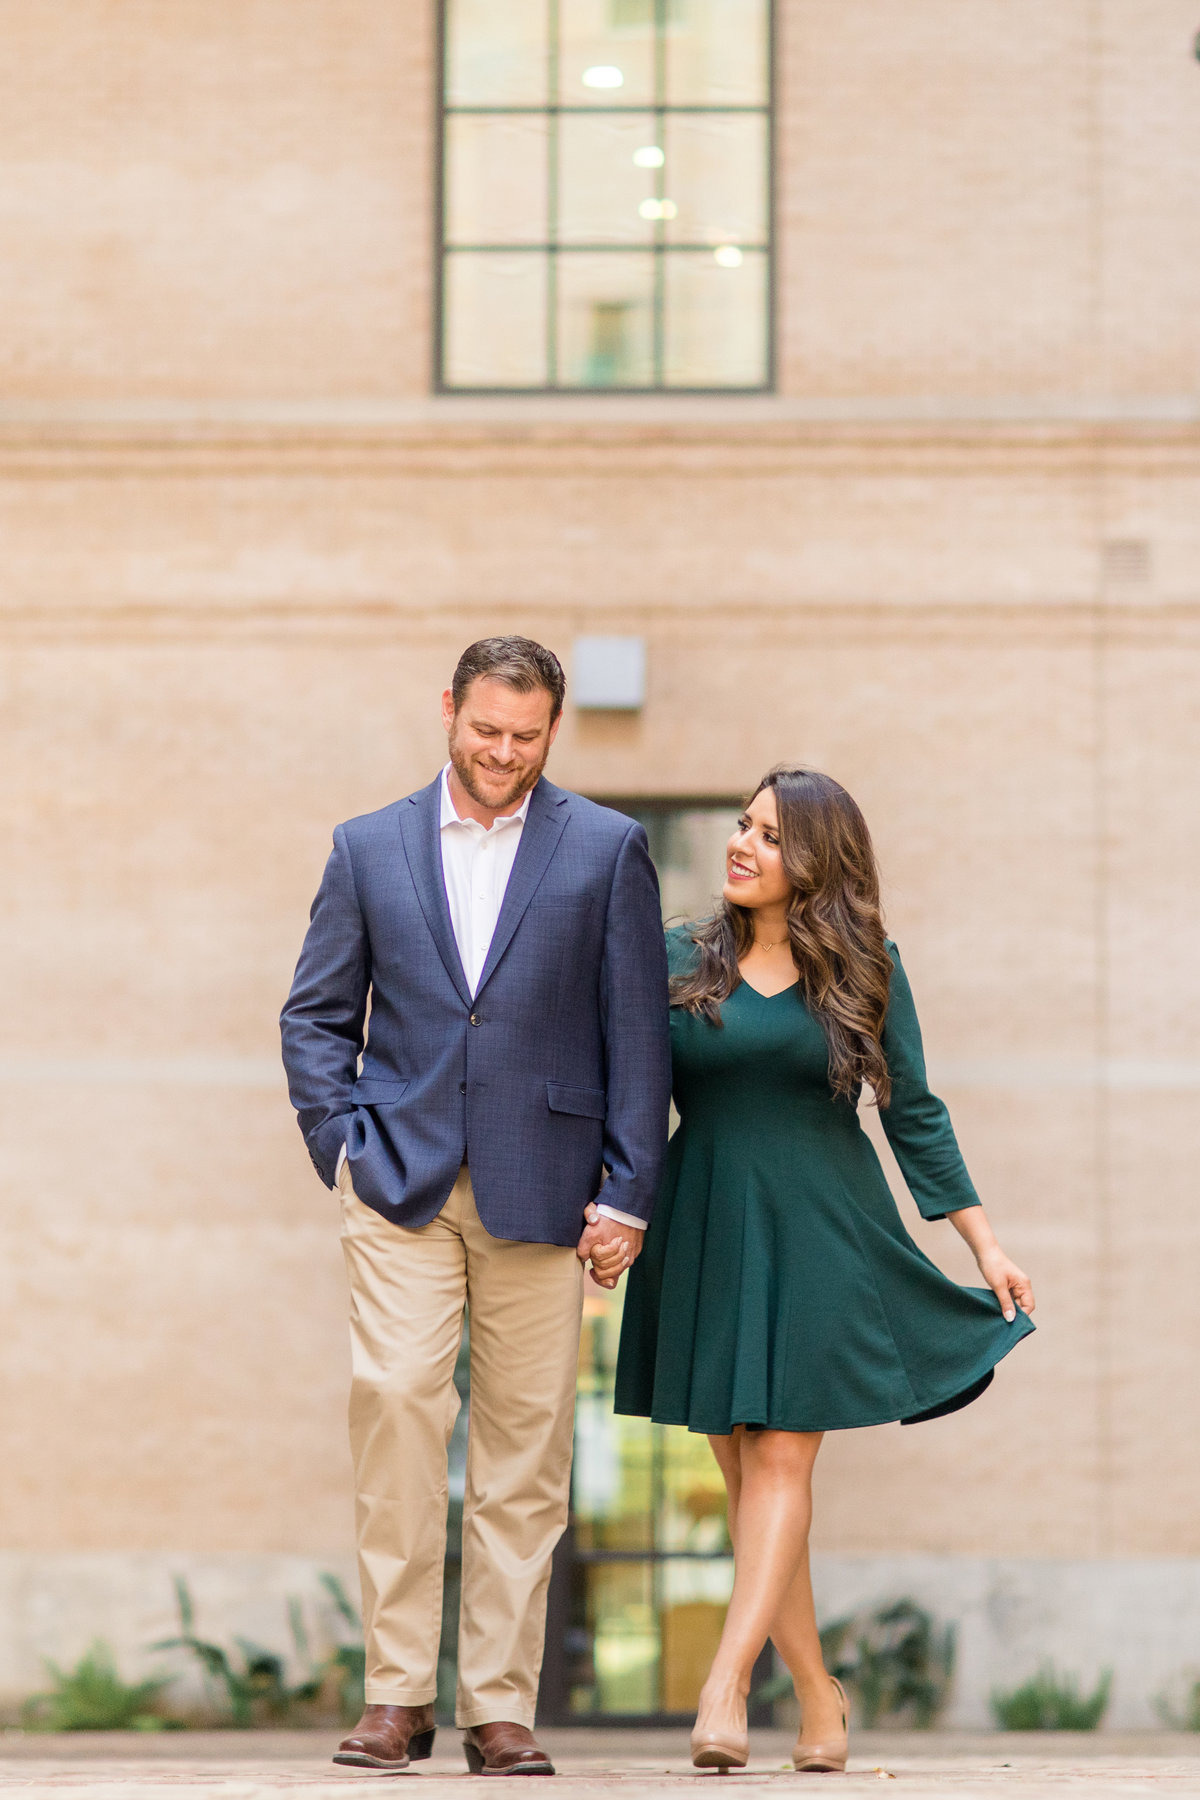 Hannah-Charis-Photography-The-Historic-Pearl-Engagement-Session-2